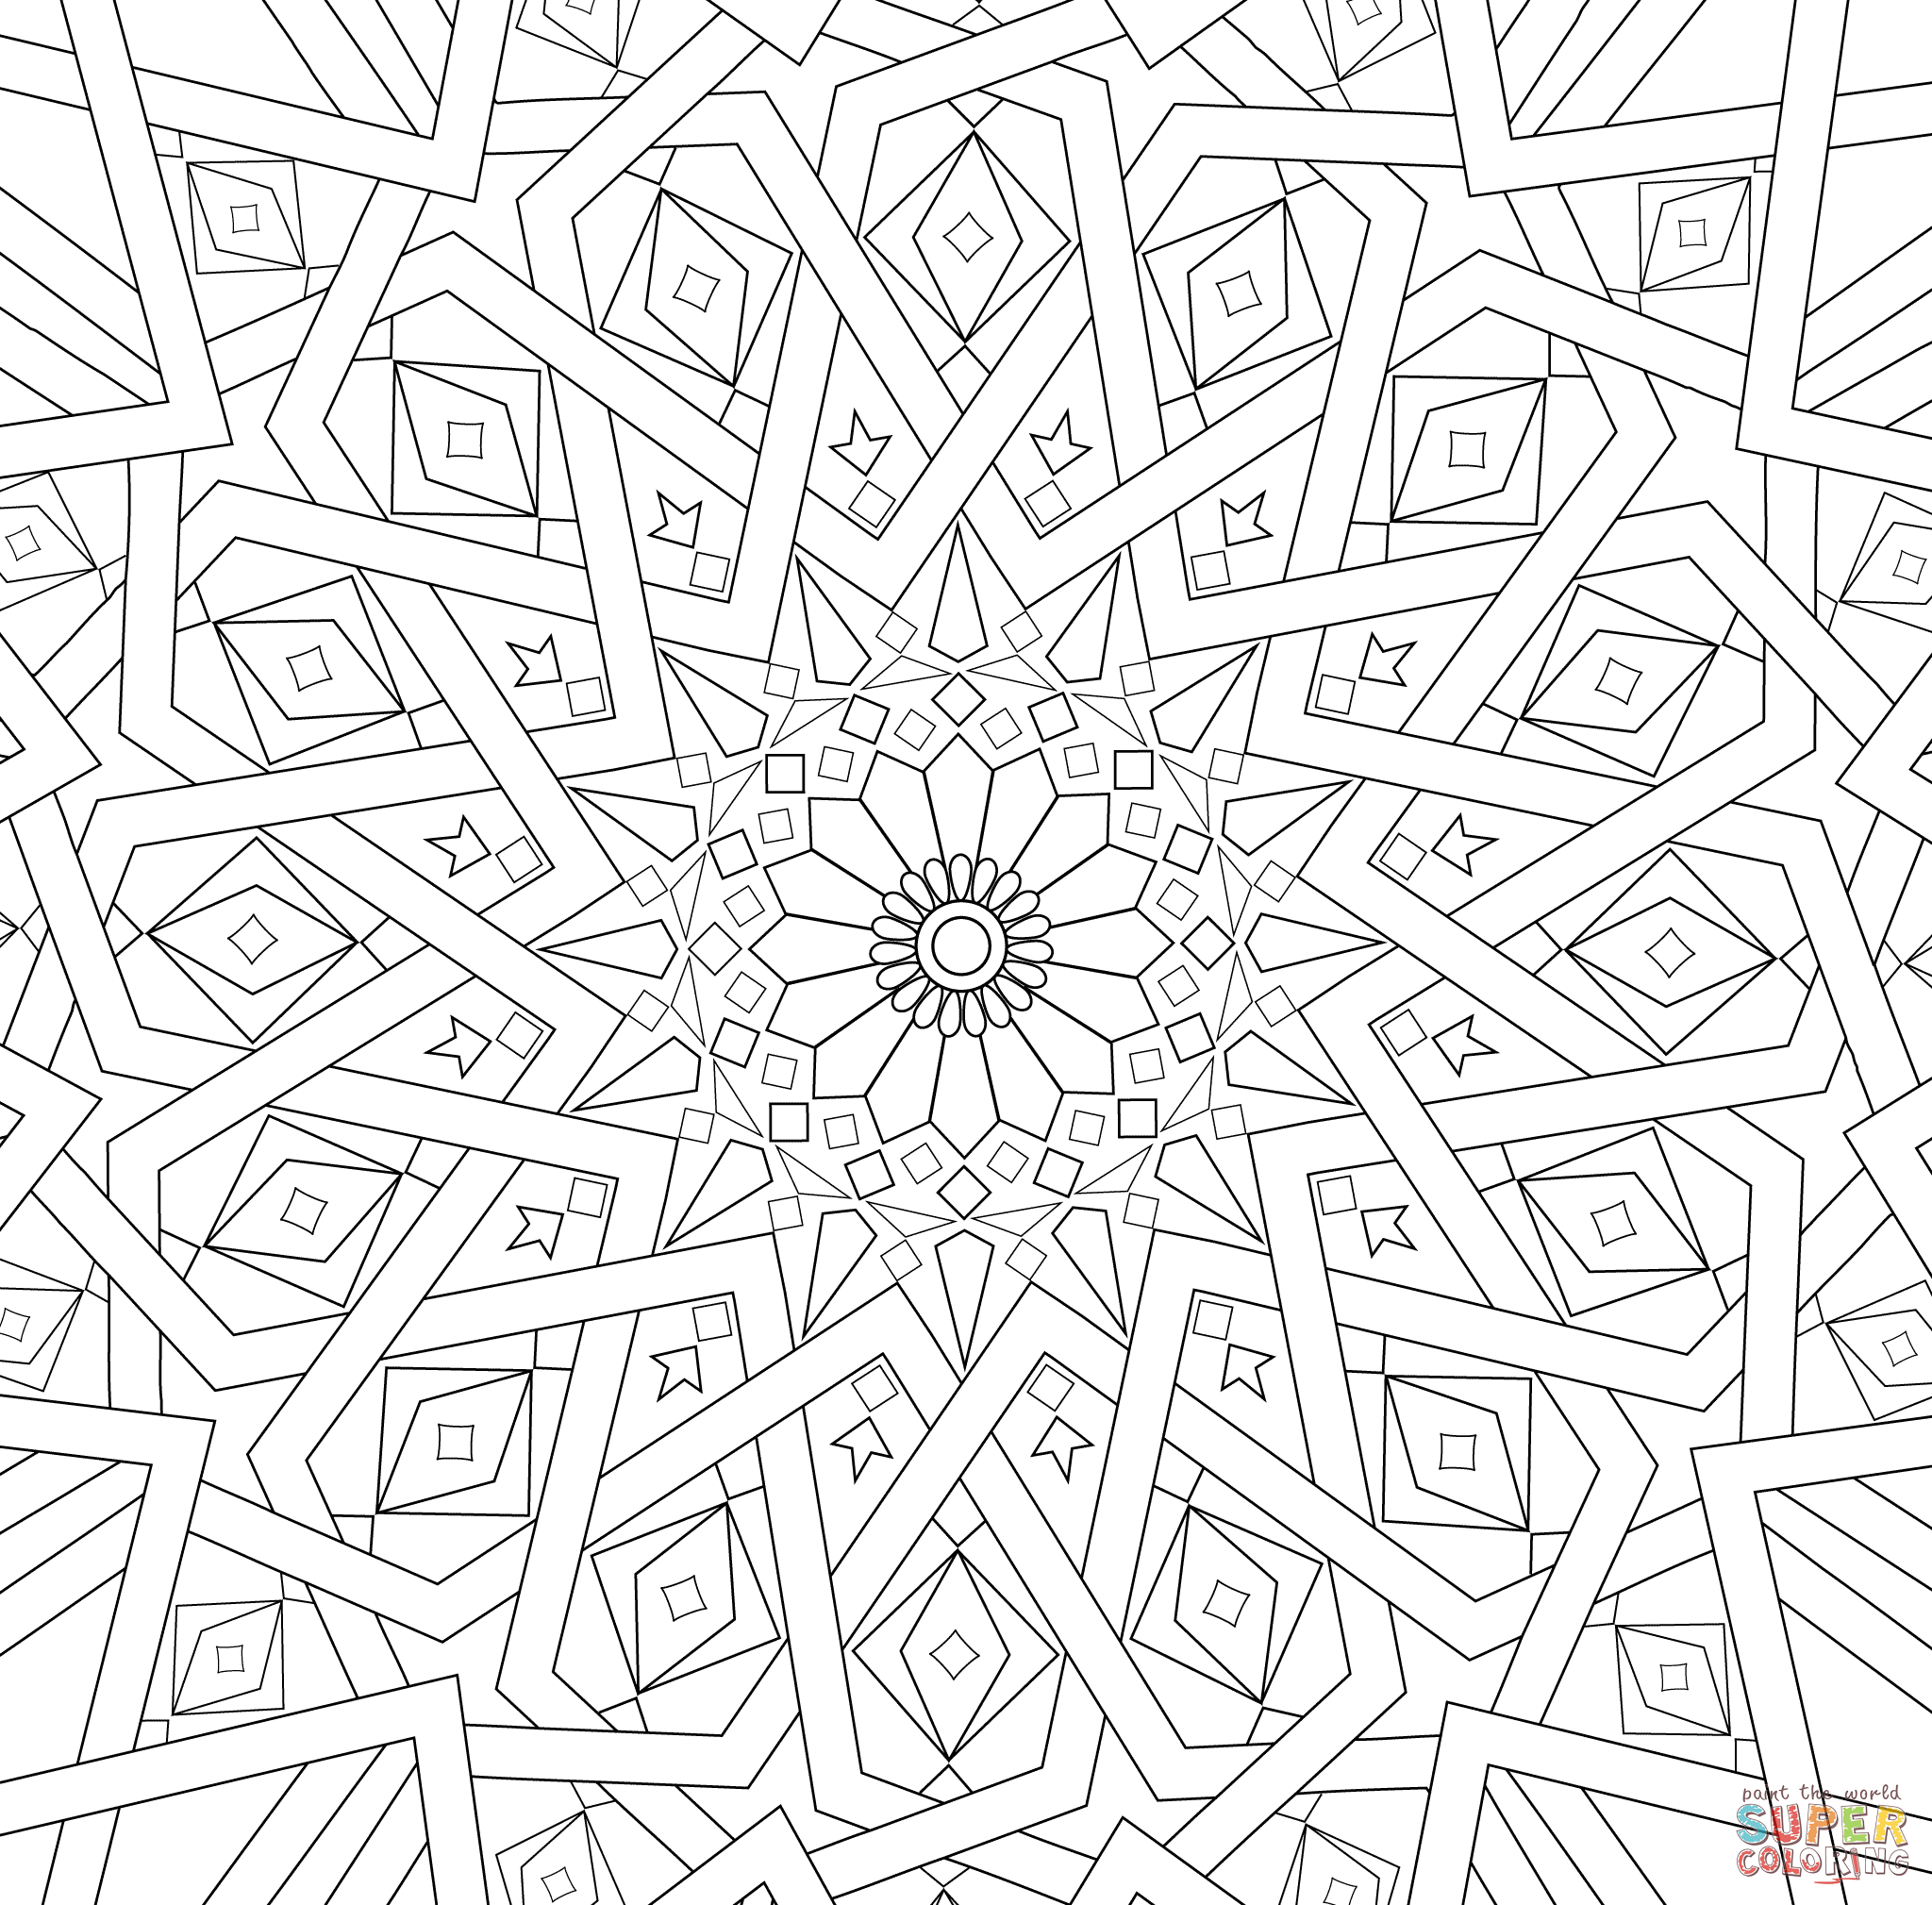 mosaic designs to color mosaic coloring pages download mosaic coloring pages at color designs mosaic to 